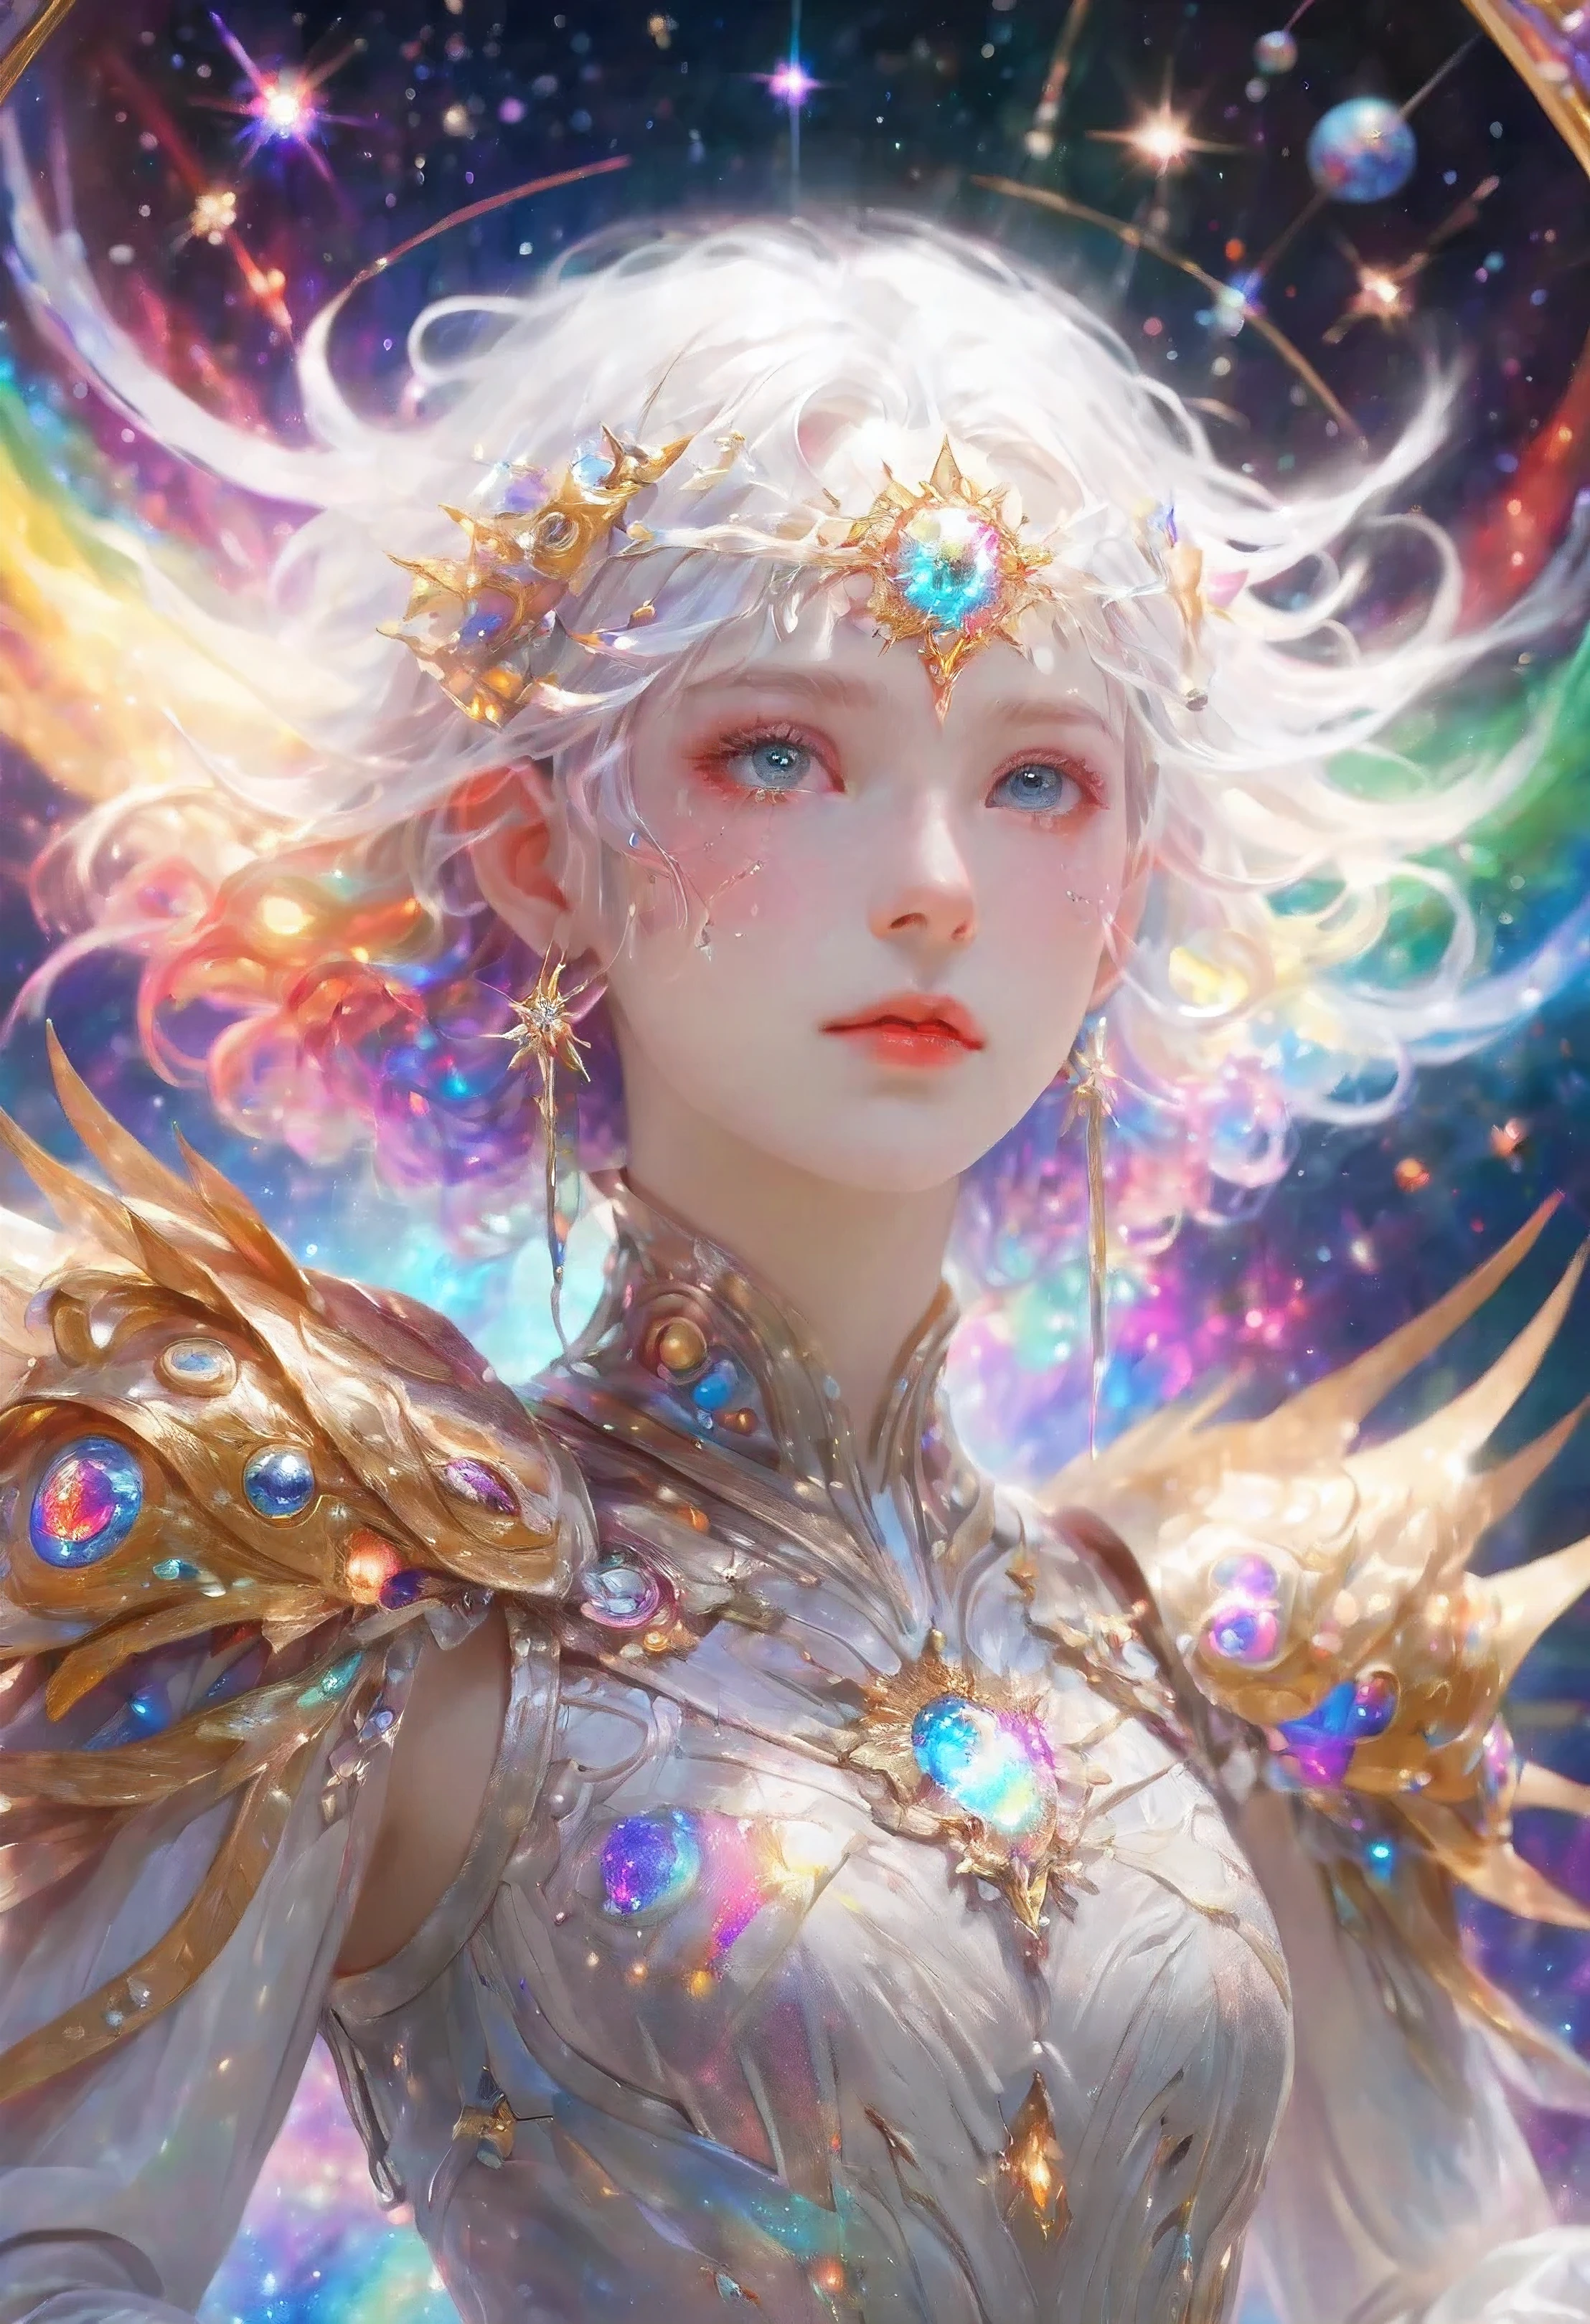 1 girl, rainbow colored hair,White exquisite armor, Rainbow colored cosmic nebula background, star, galaxy, intricate details, White skin,masterpiece, best quality, current, Floating happily in space, luminescent, luminescent